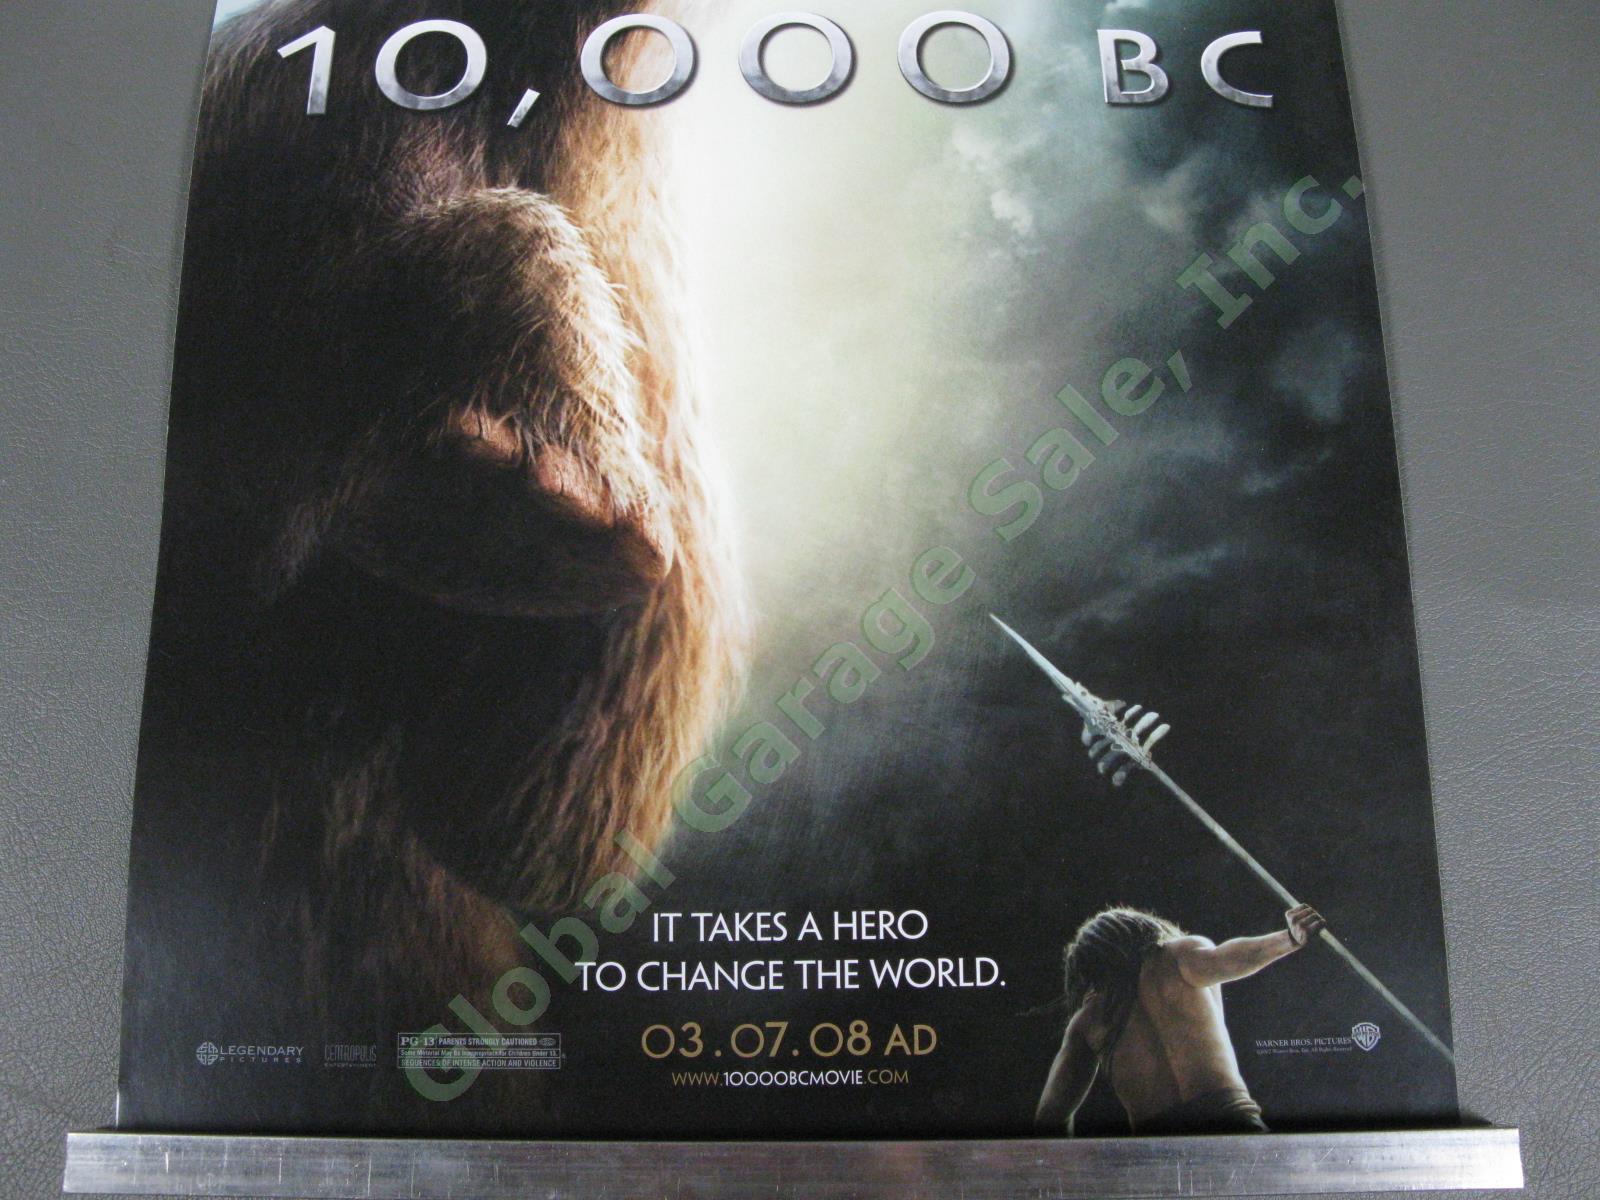 10000 BC Original Movie Theater Lobby Card Display Promo Poster Wooly Mammoth 2